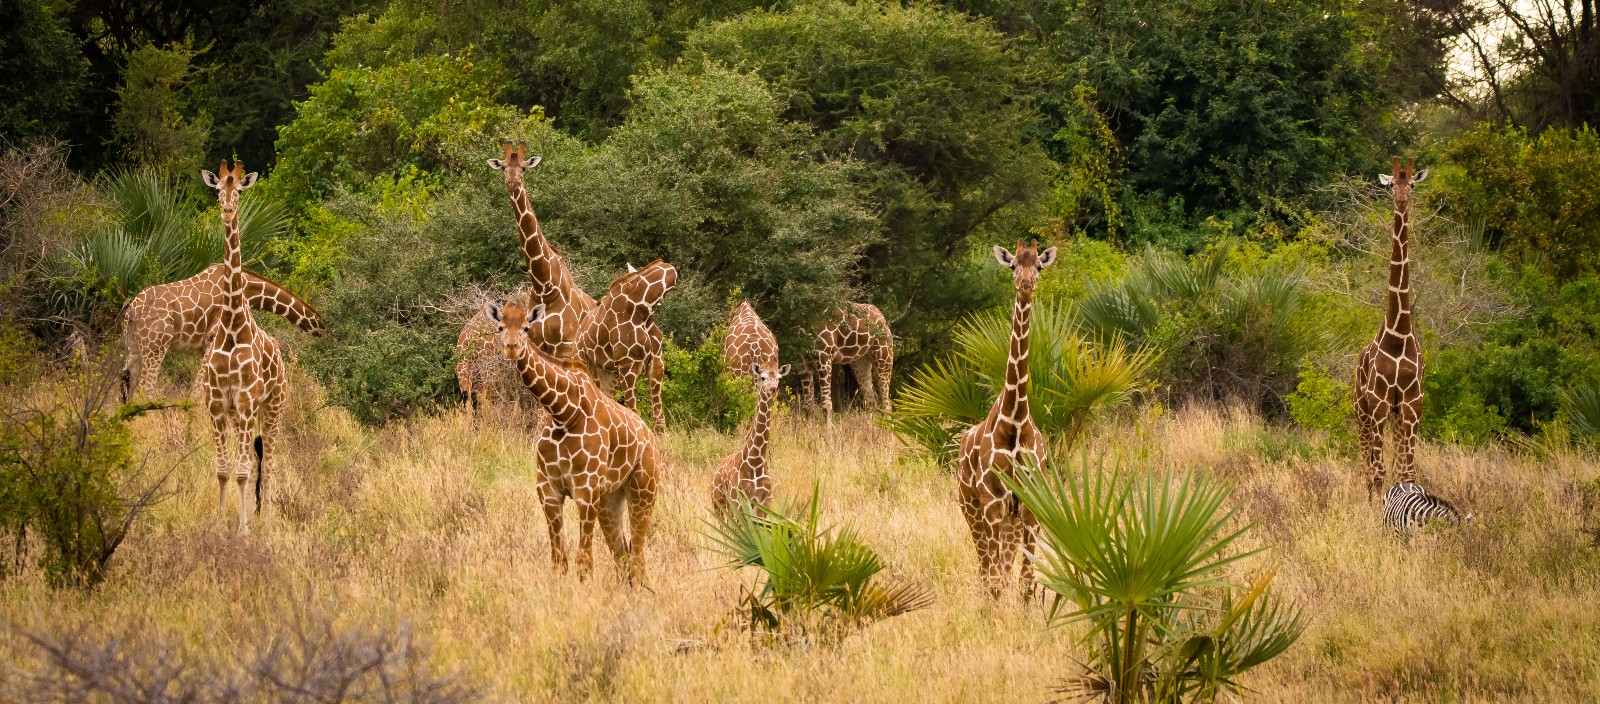 A photograph of of a group of 11 giraffes - some adults and some infants, standing in lush greenery, with plants and grasses. There is also a zebra grazing towards the right hand side of the shot.